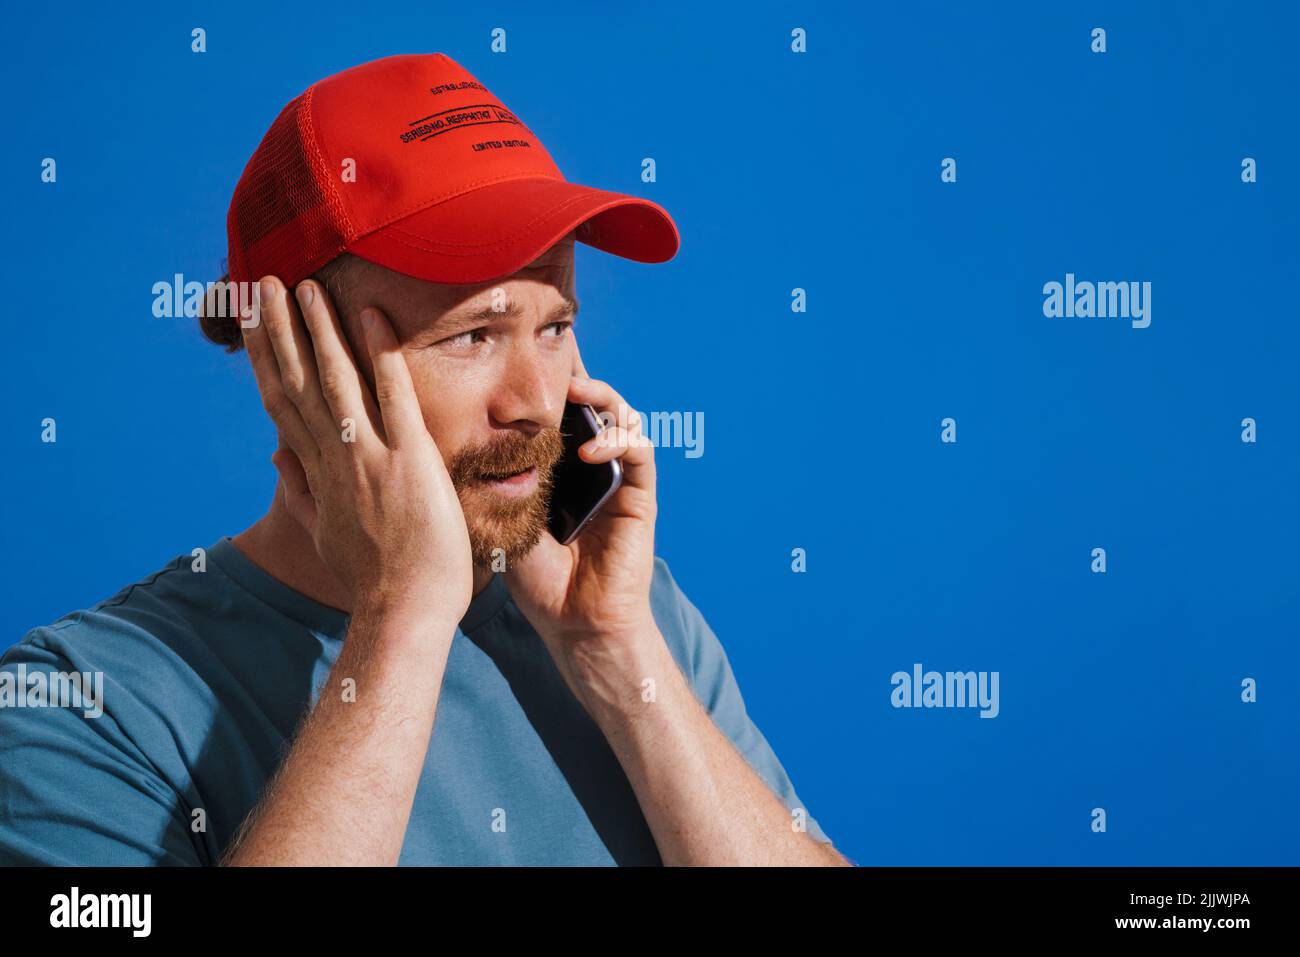 White ginger man wearing cap talking on mobile phone isolated over blue background Stock Photo